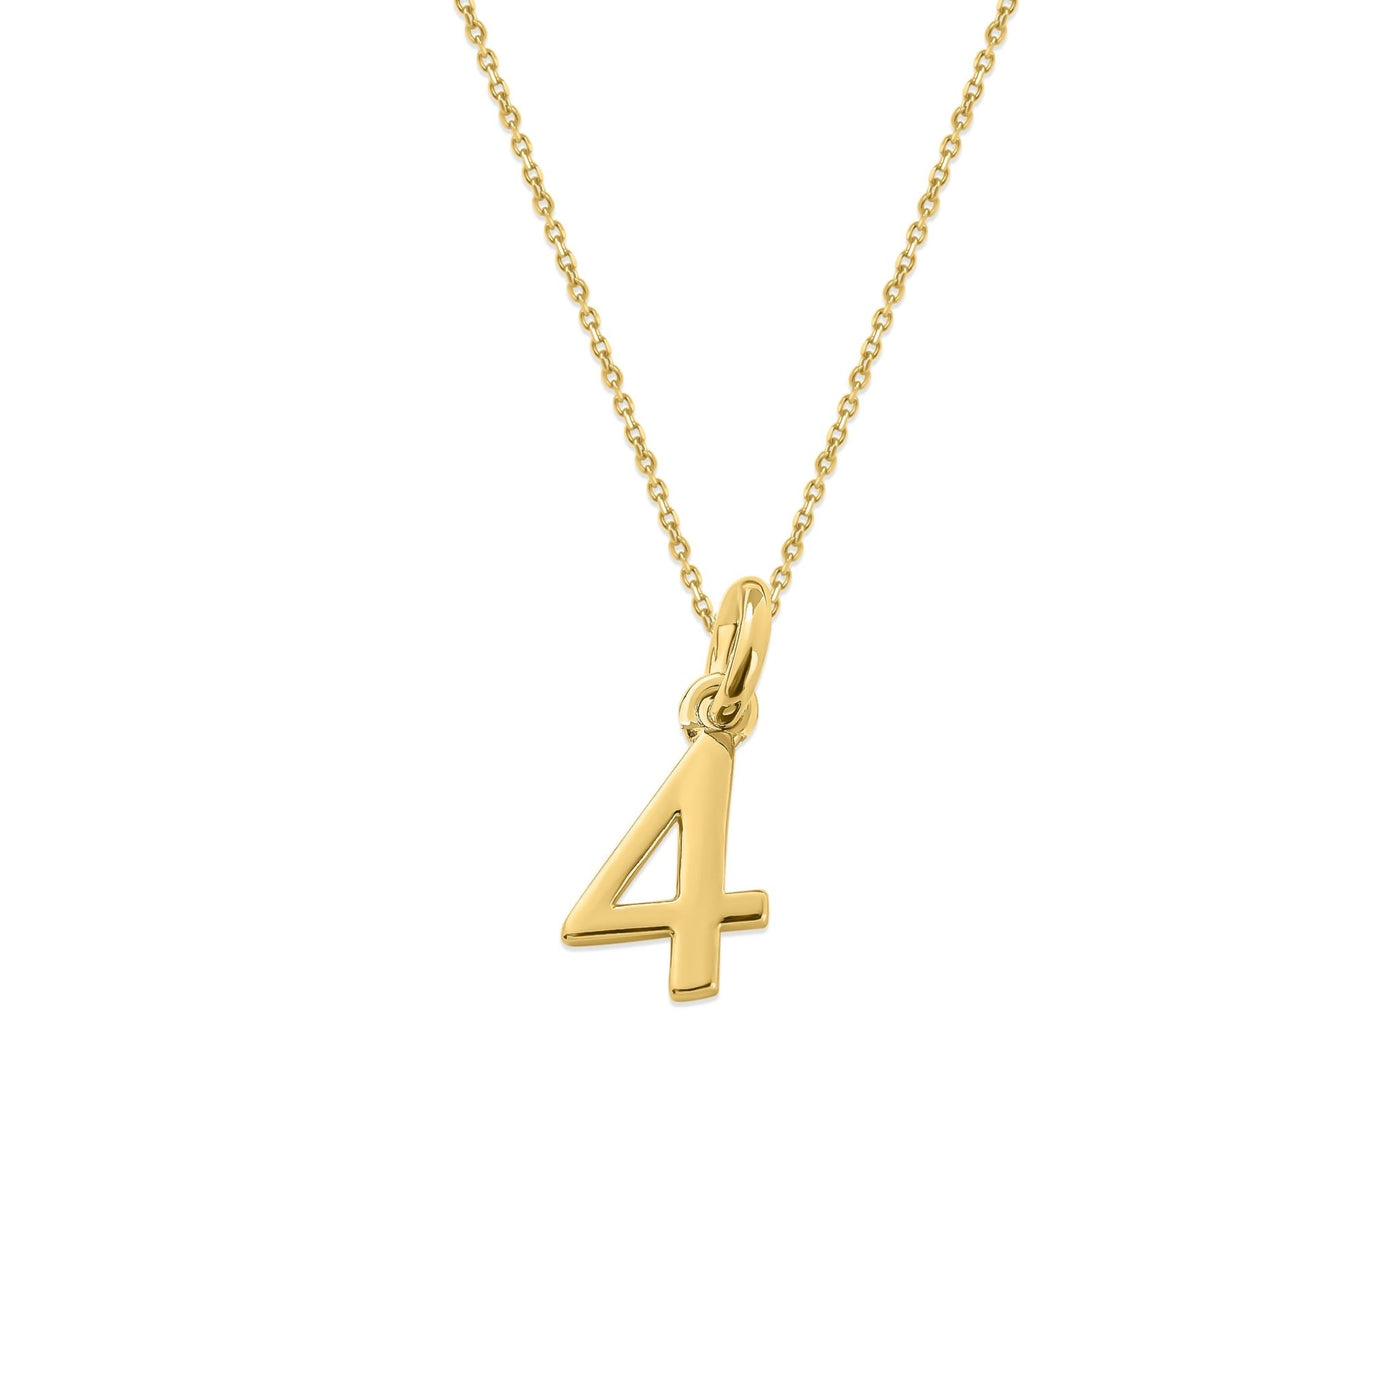 Sterling Silver Numbers Charms Necklace - Capsul